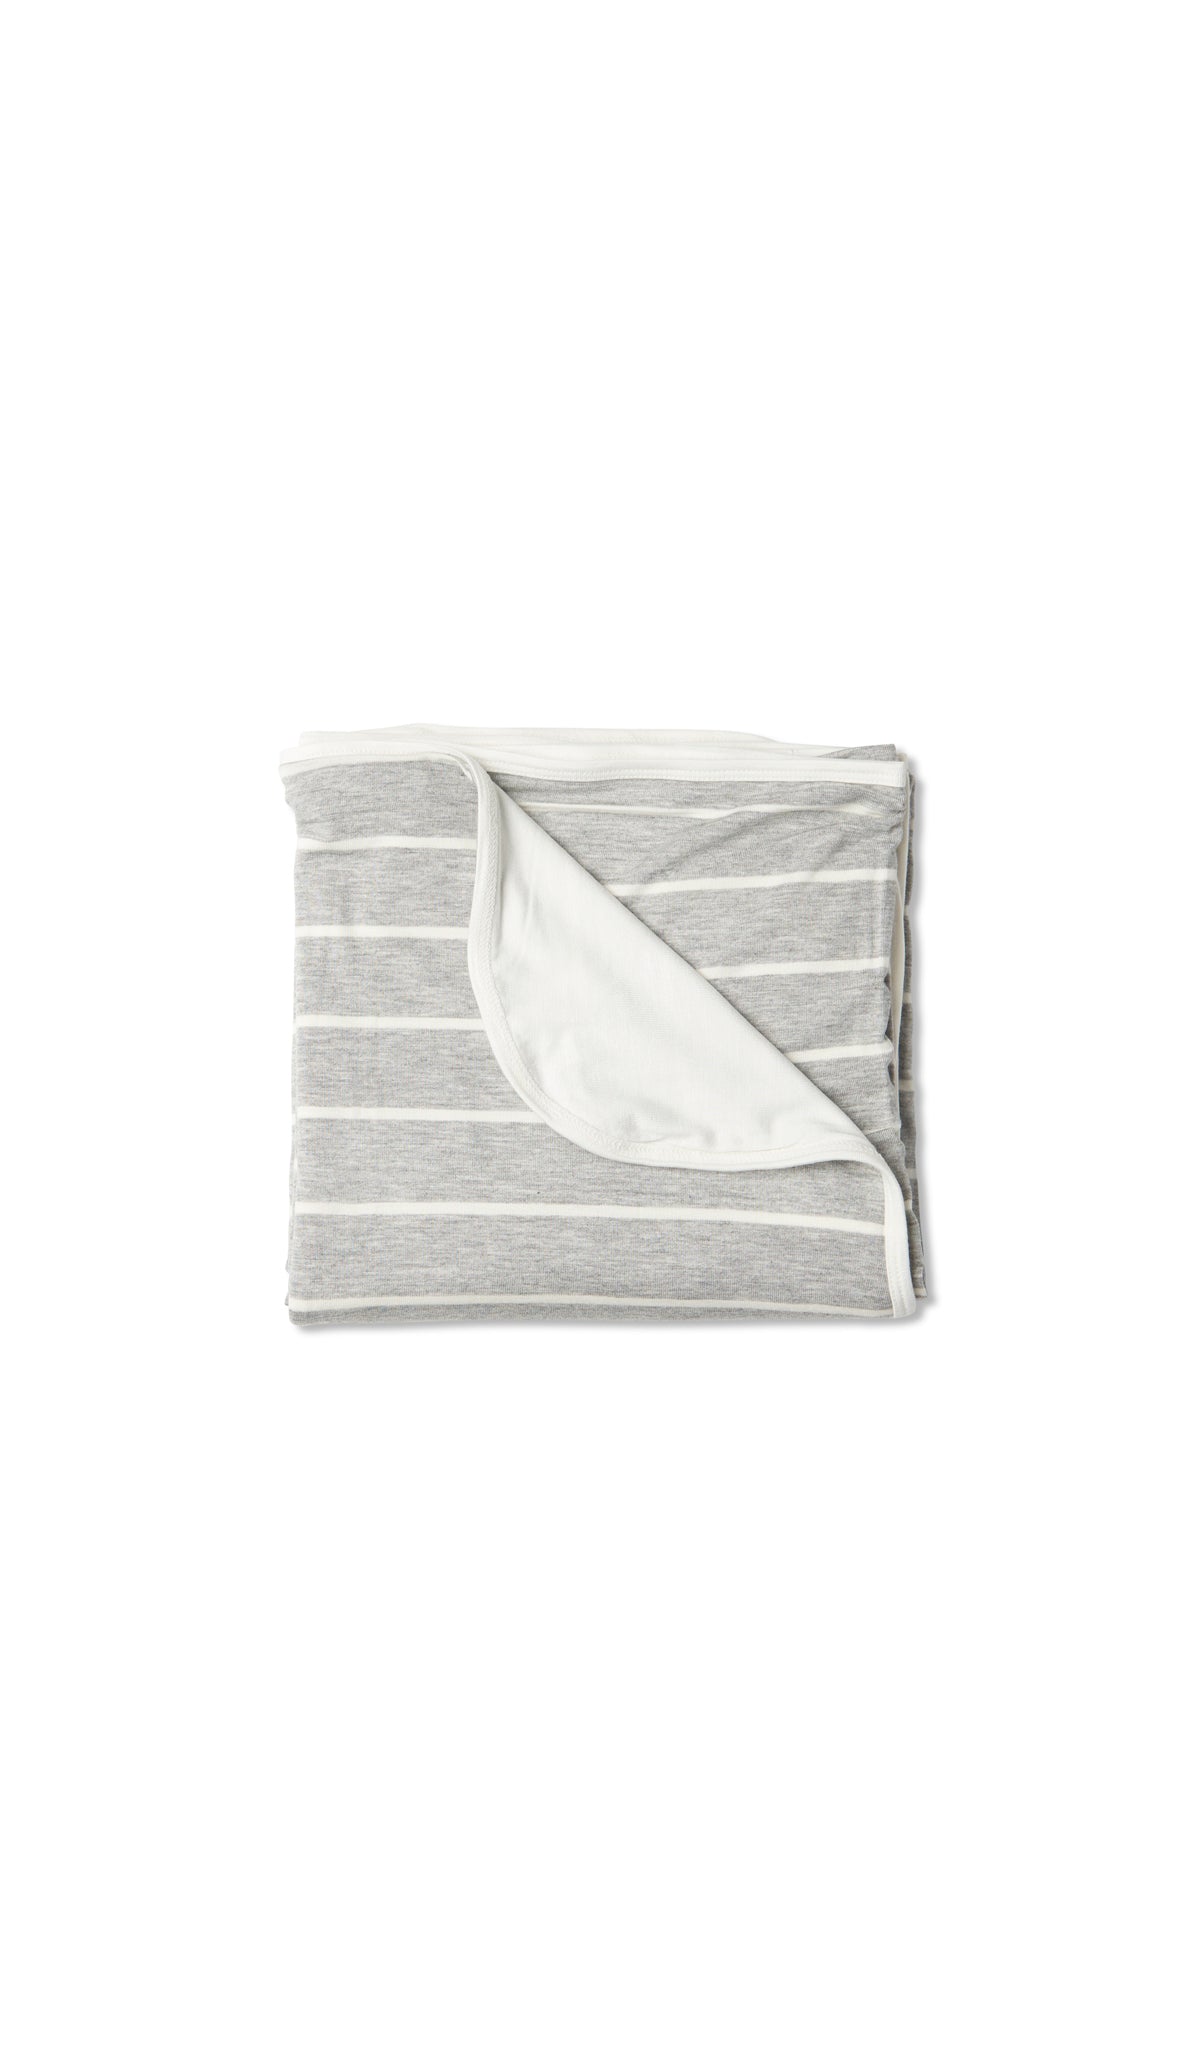 Heather Grey Swaddle Blanket folded into a square with print showing on one side and reversible contrast solid showing on other side of fold down flap.